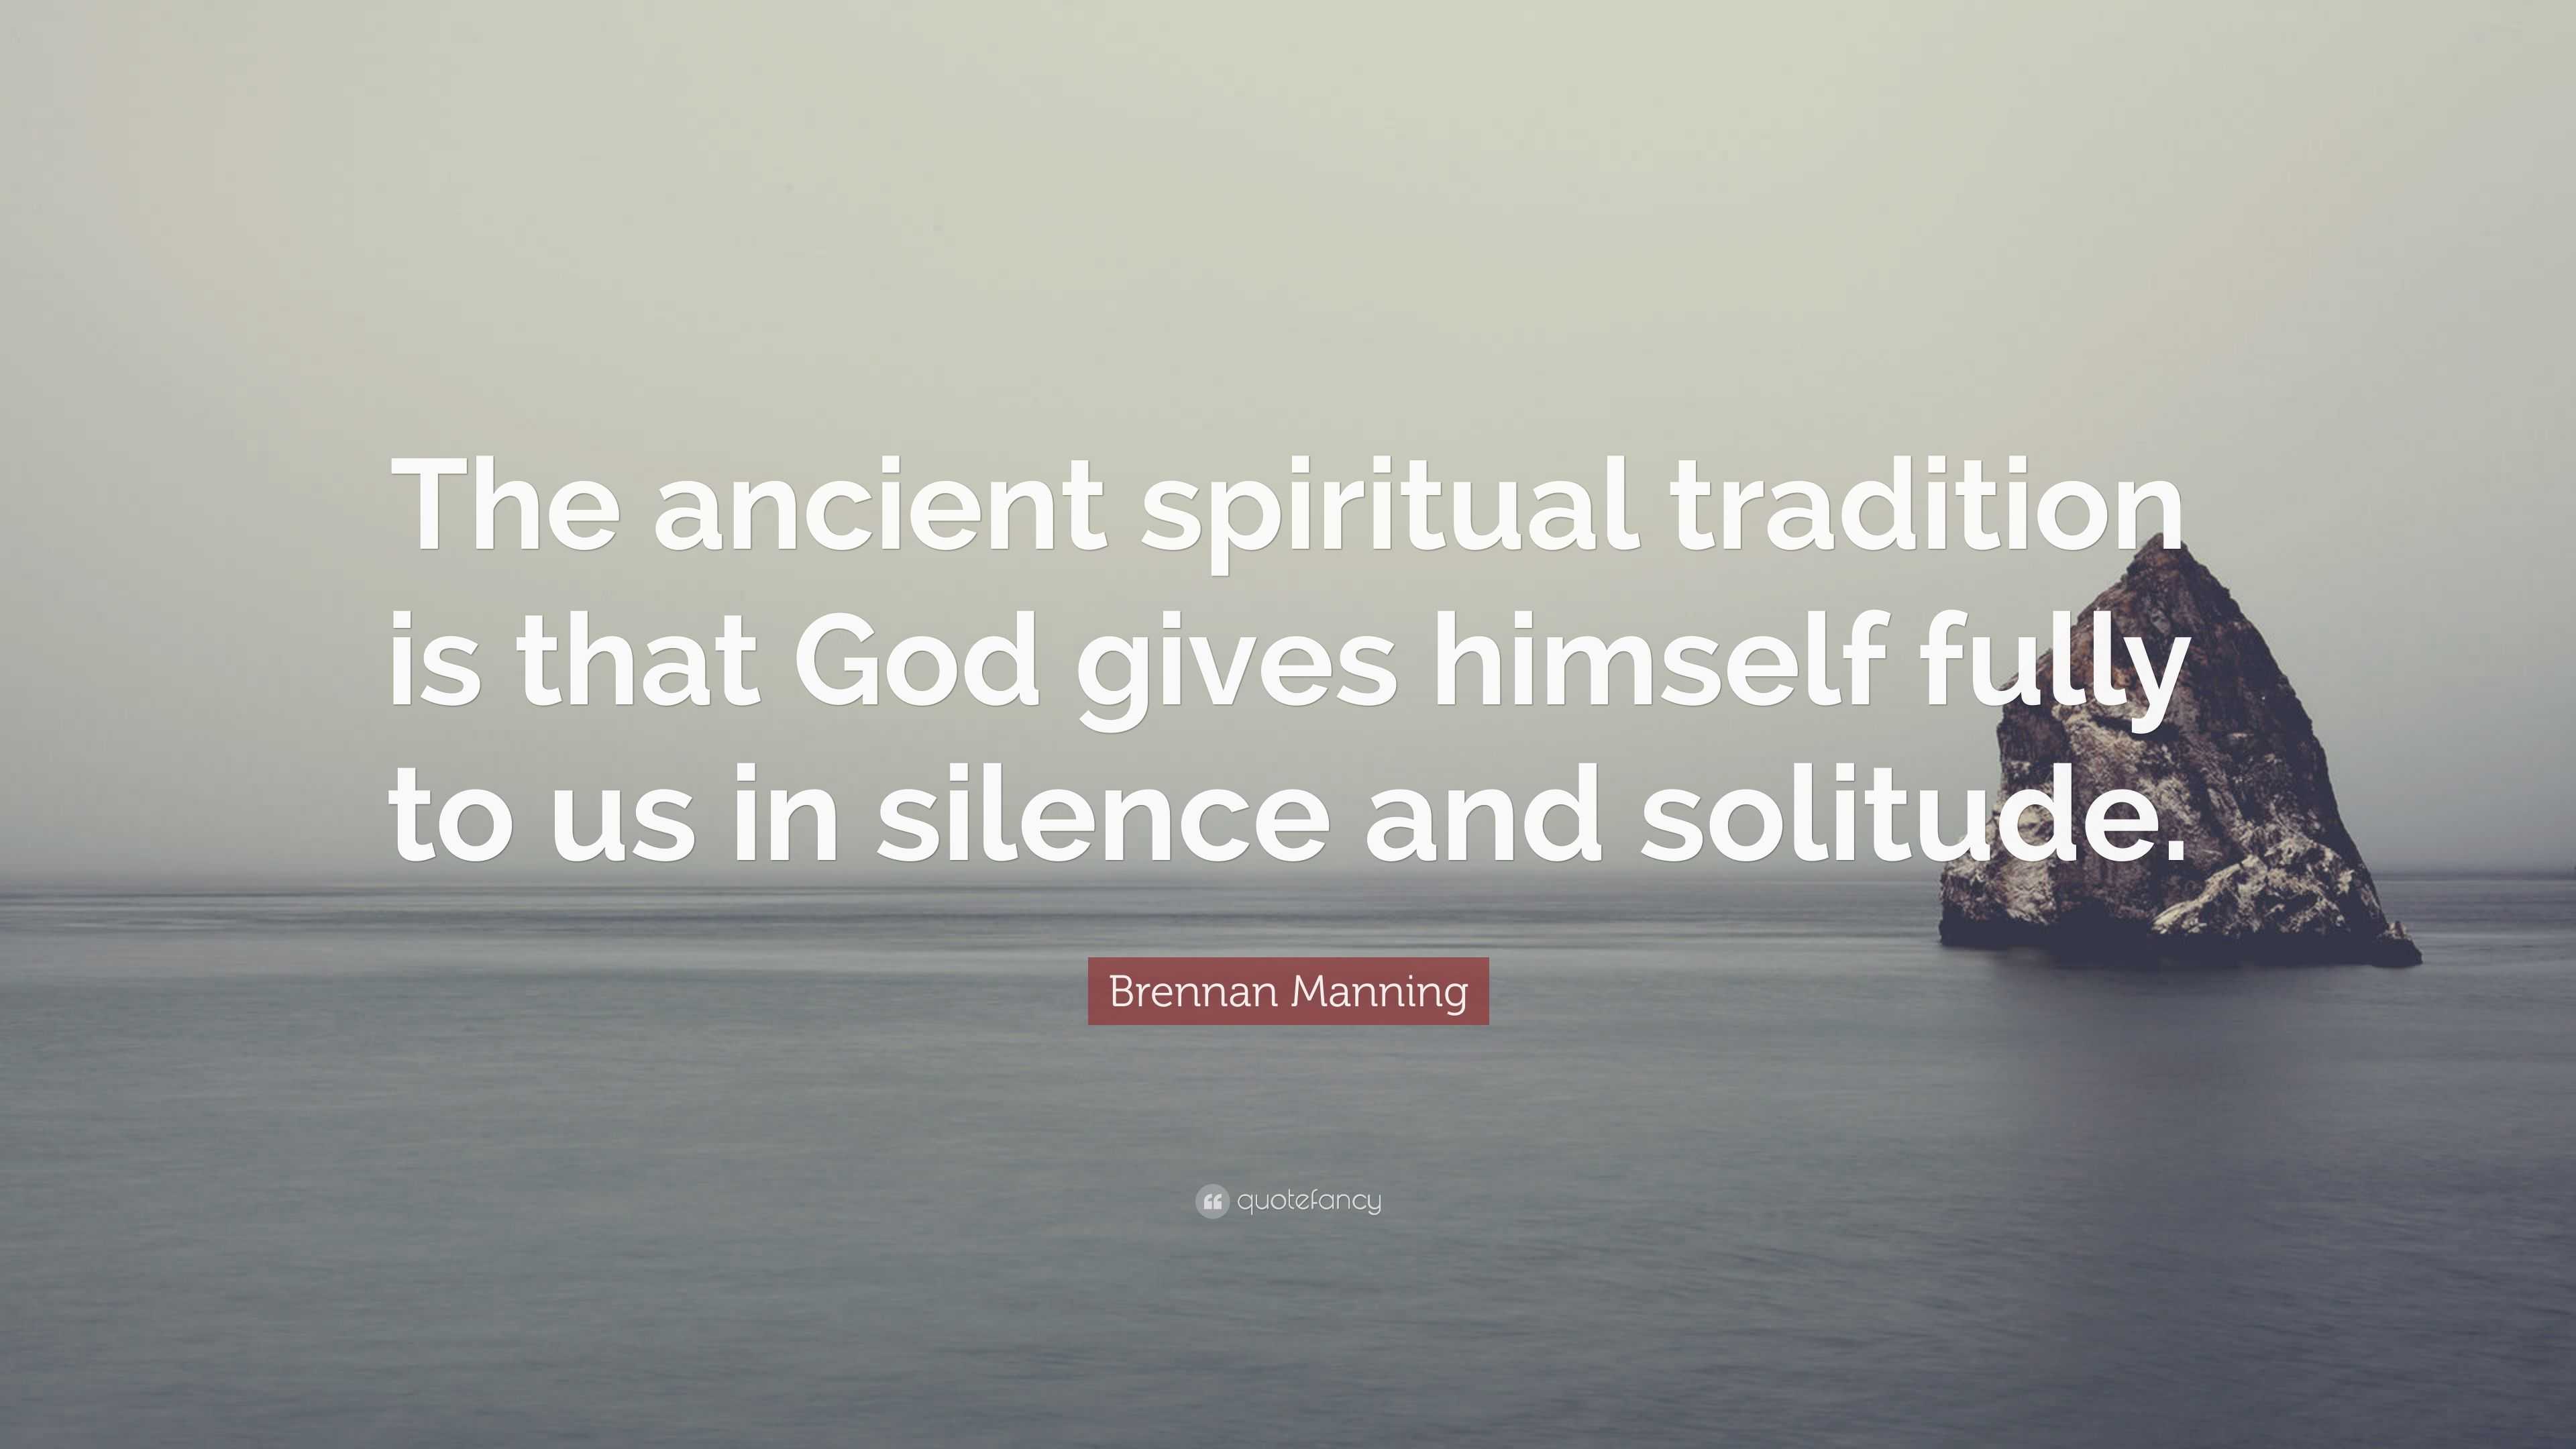 Brennan Manning Quote: “The ancient spiritual tradition is that God ...